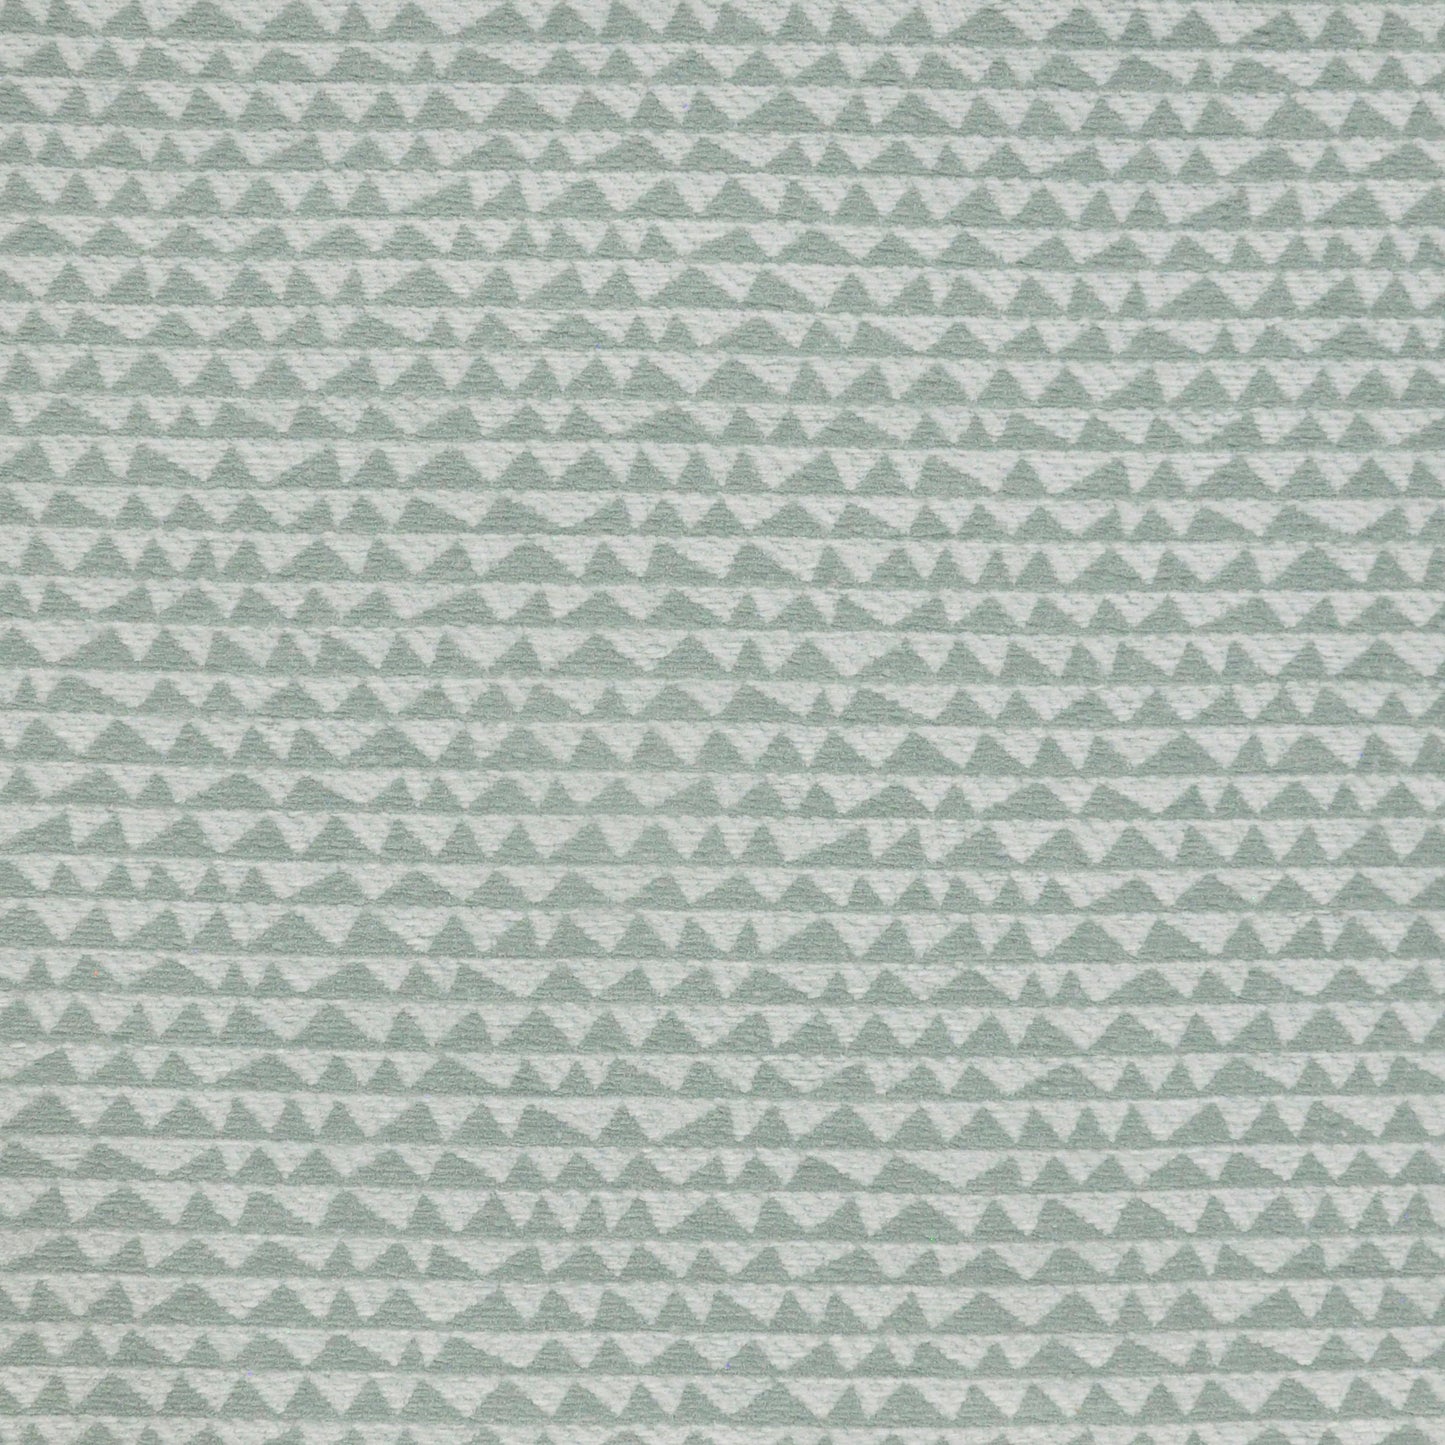 Purchase Maxwell Fabric - Mountaineer, # 950 Waves